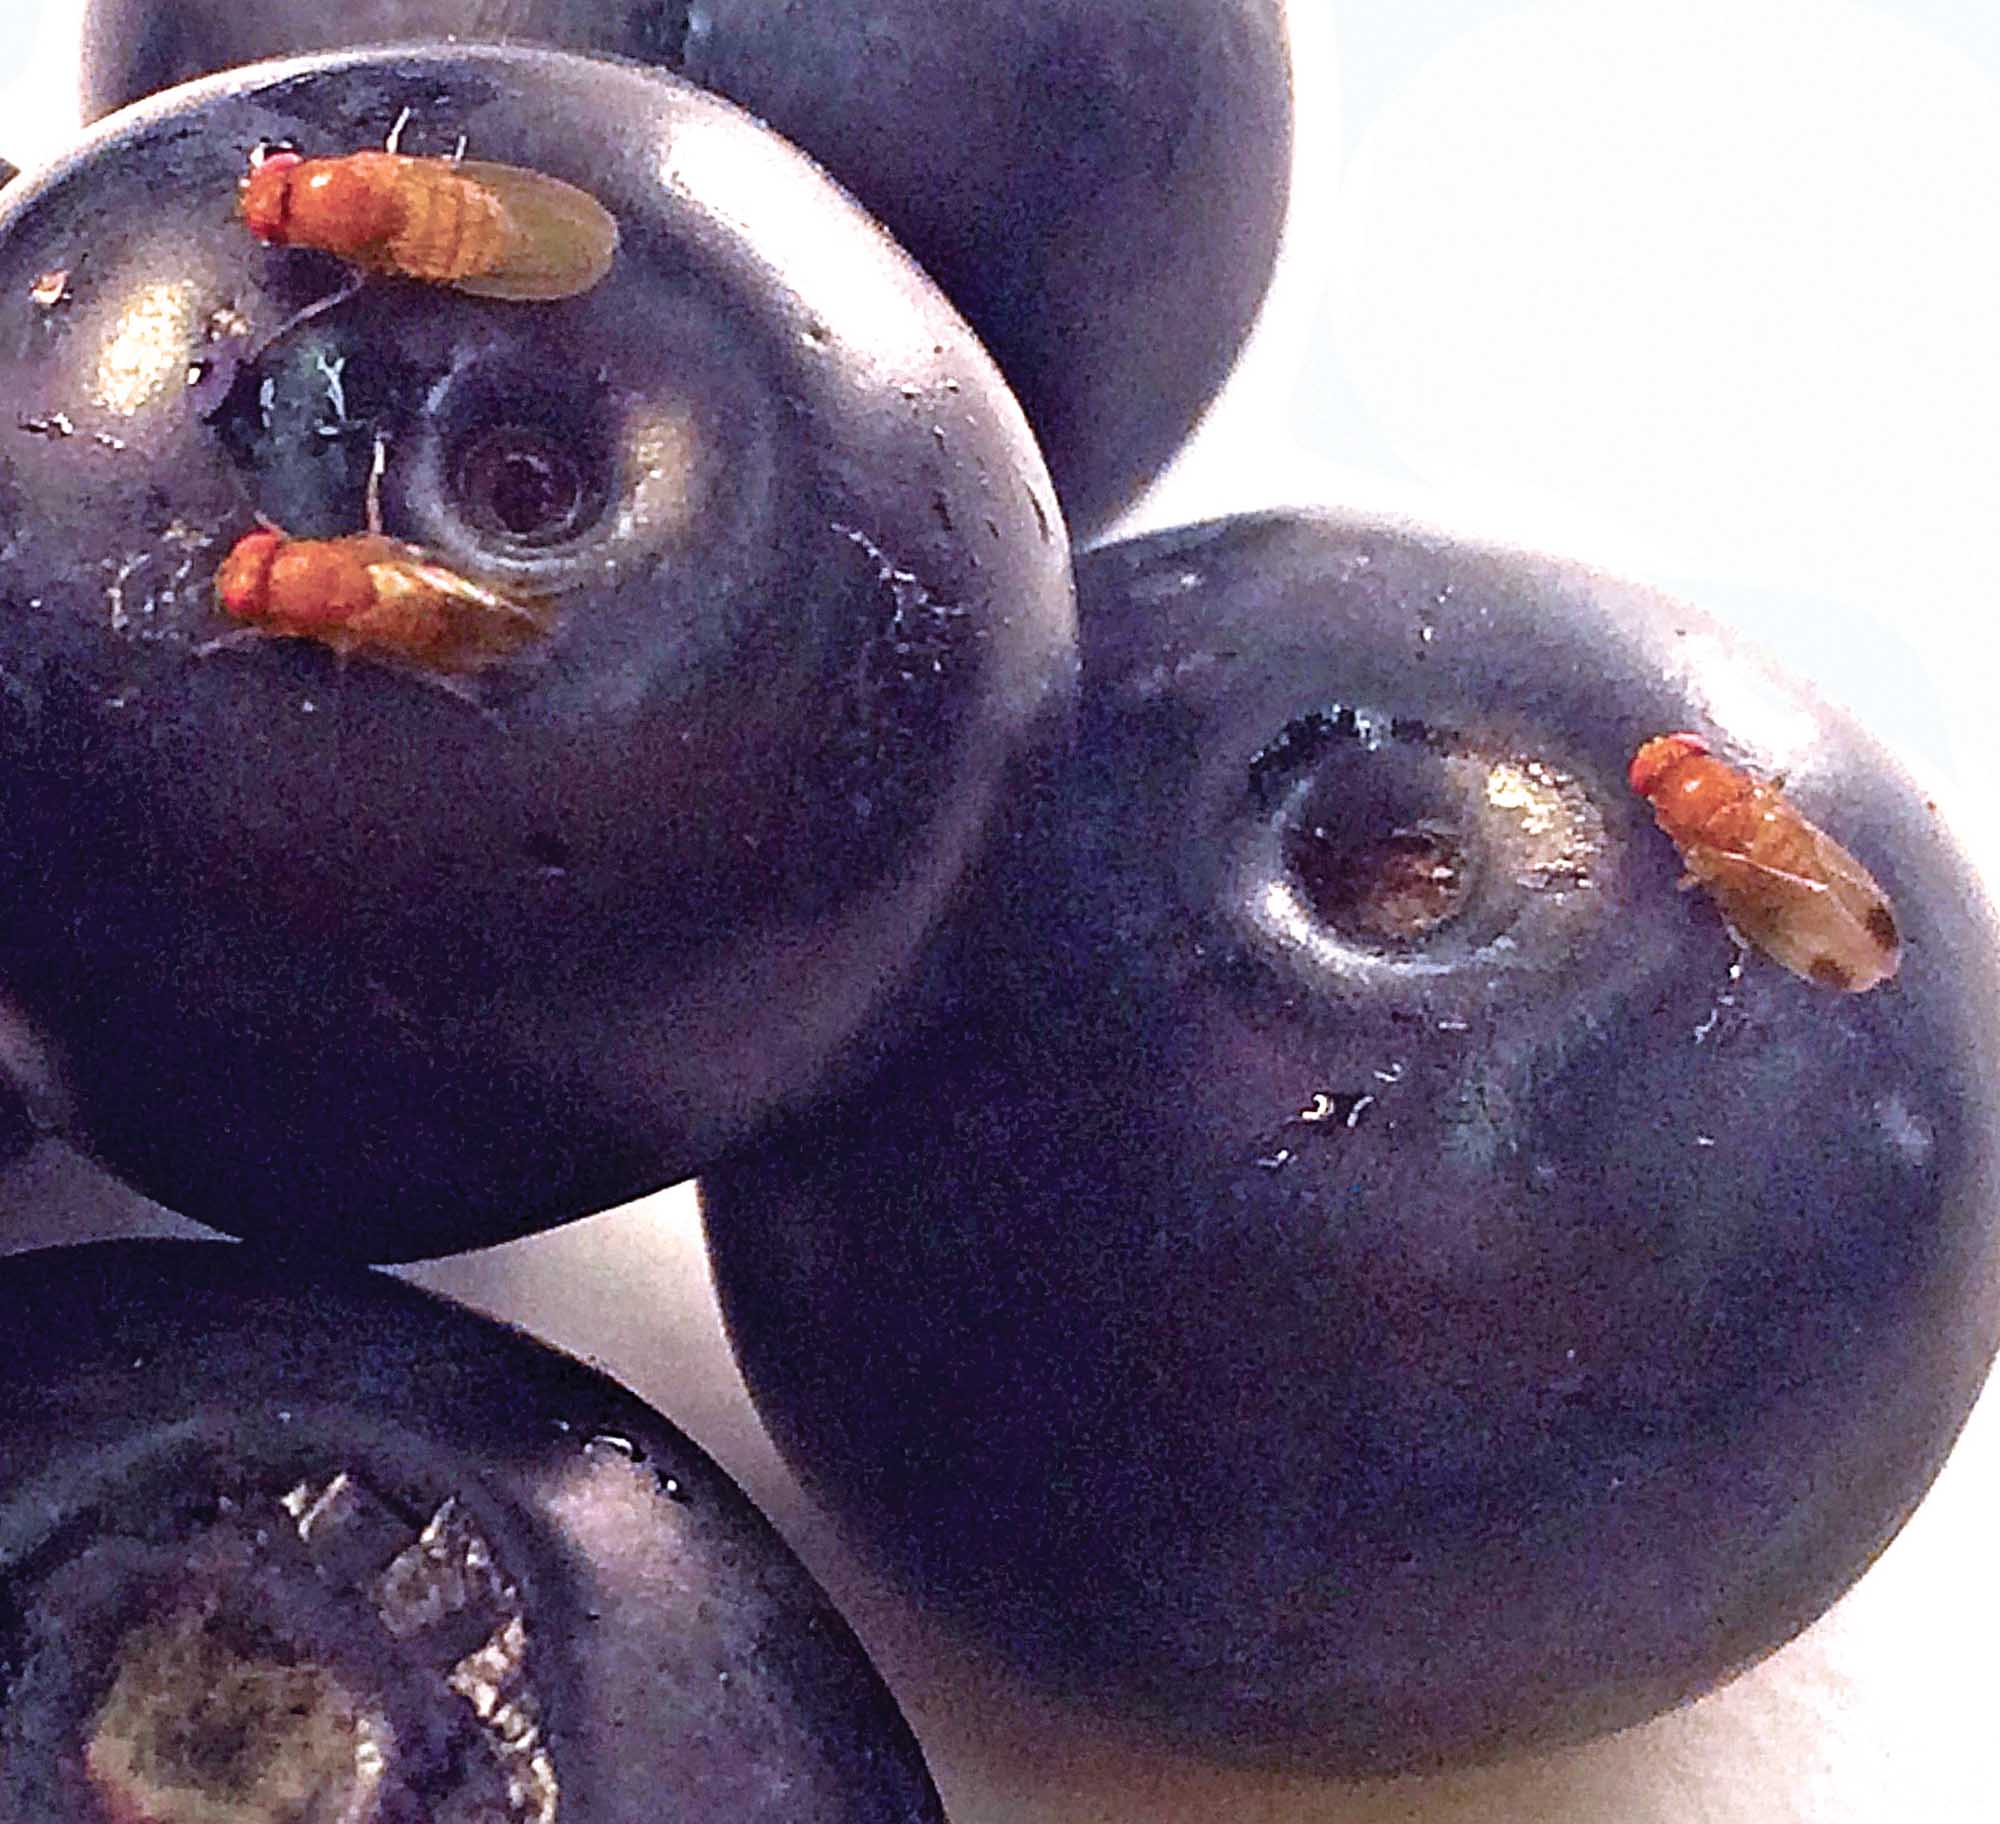 Spotted wing drosophila love blueberries, though not when they’ve been treated with butyl anthranilate. The male fly has a dark spot at the tip of its wings. (Courtesy University of California, Riverside)